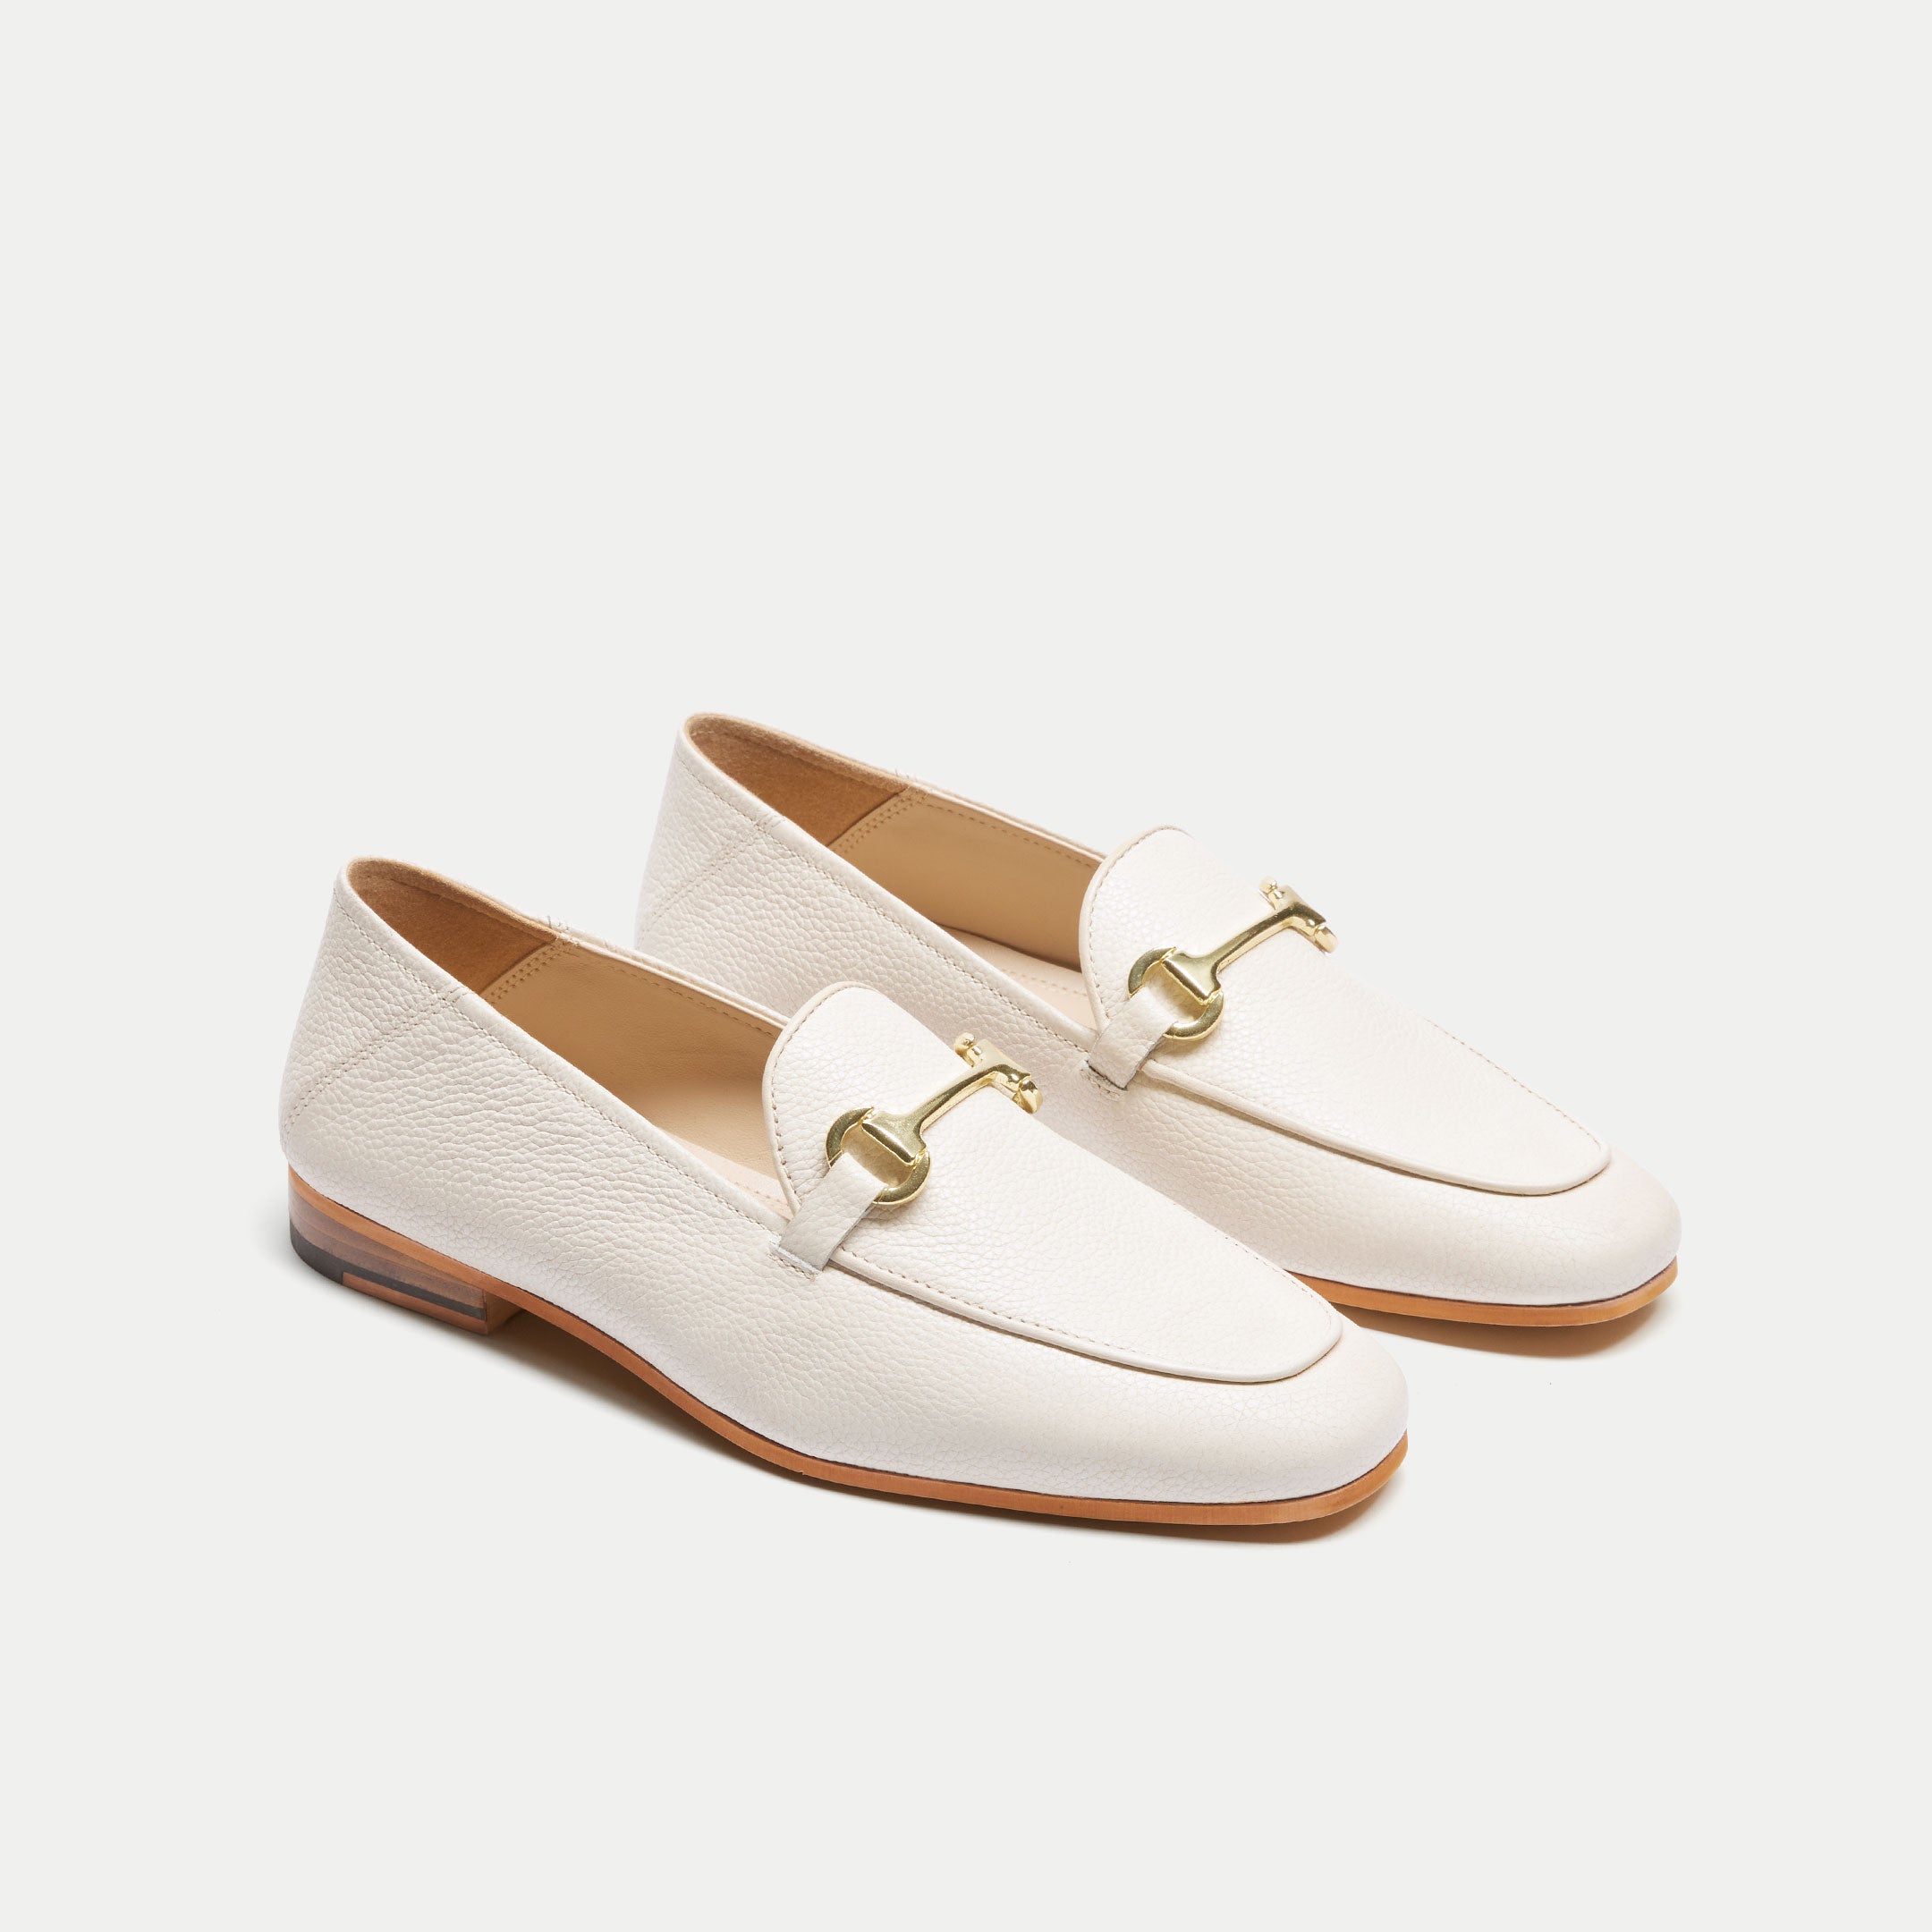 Walk London Womens Bella Trim Loafer in Off White Leather